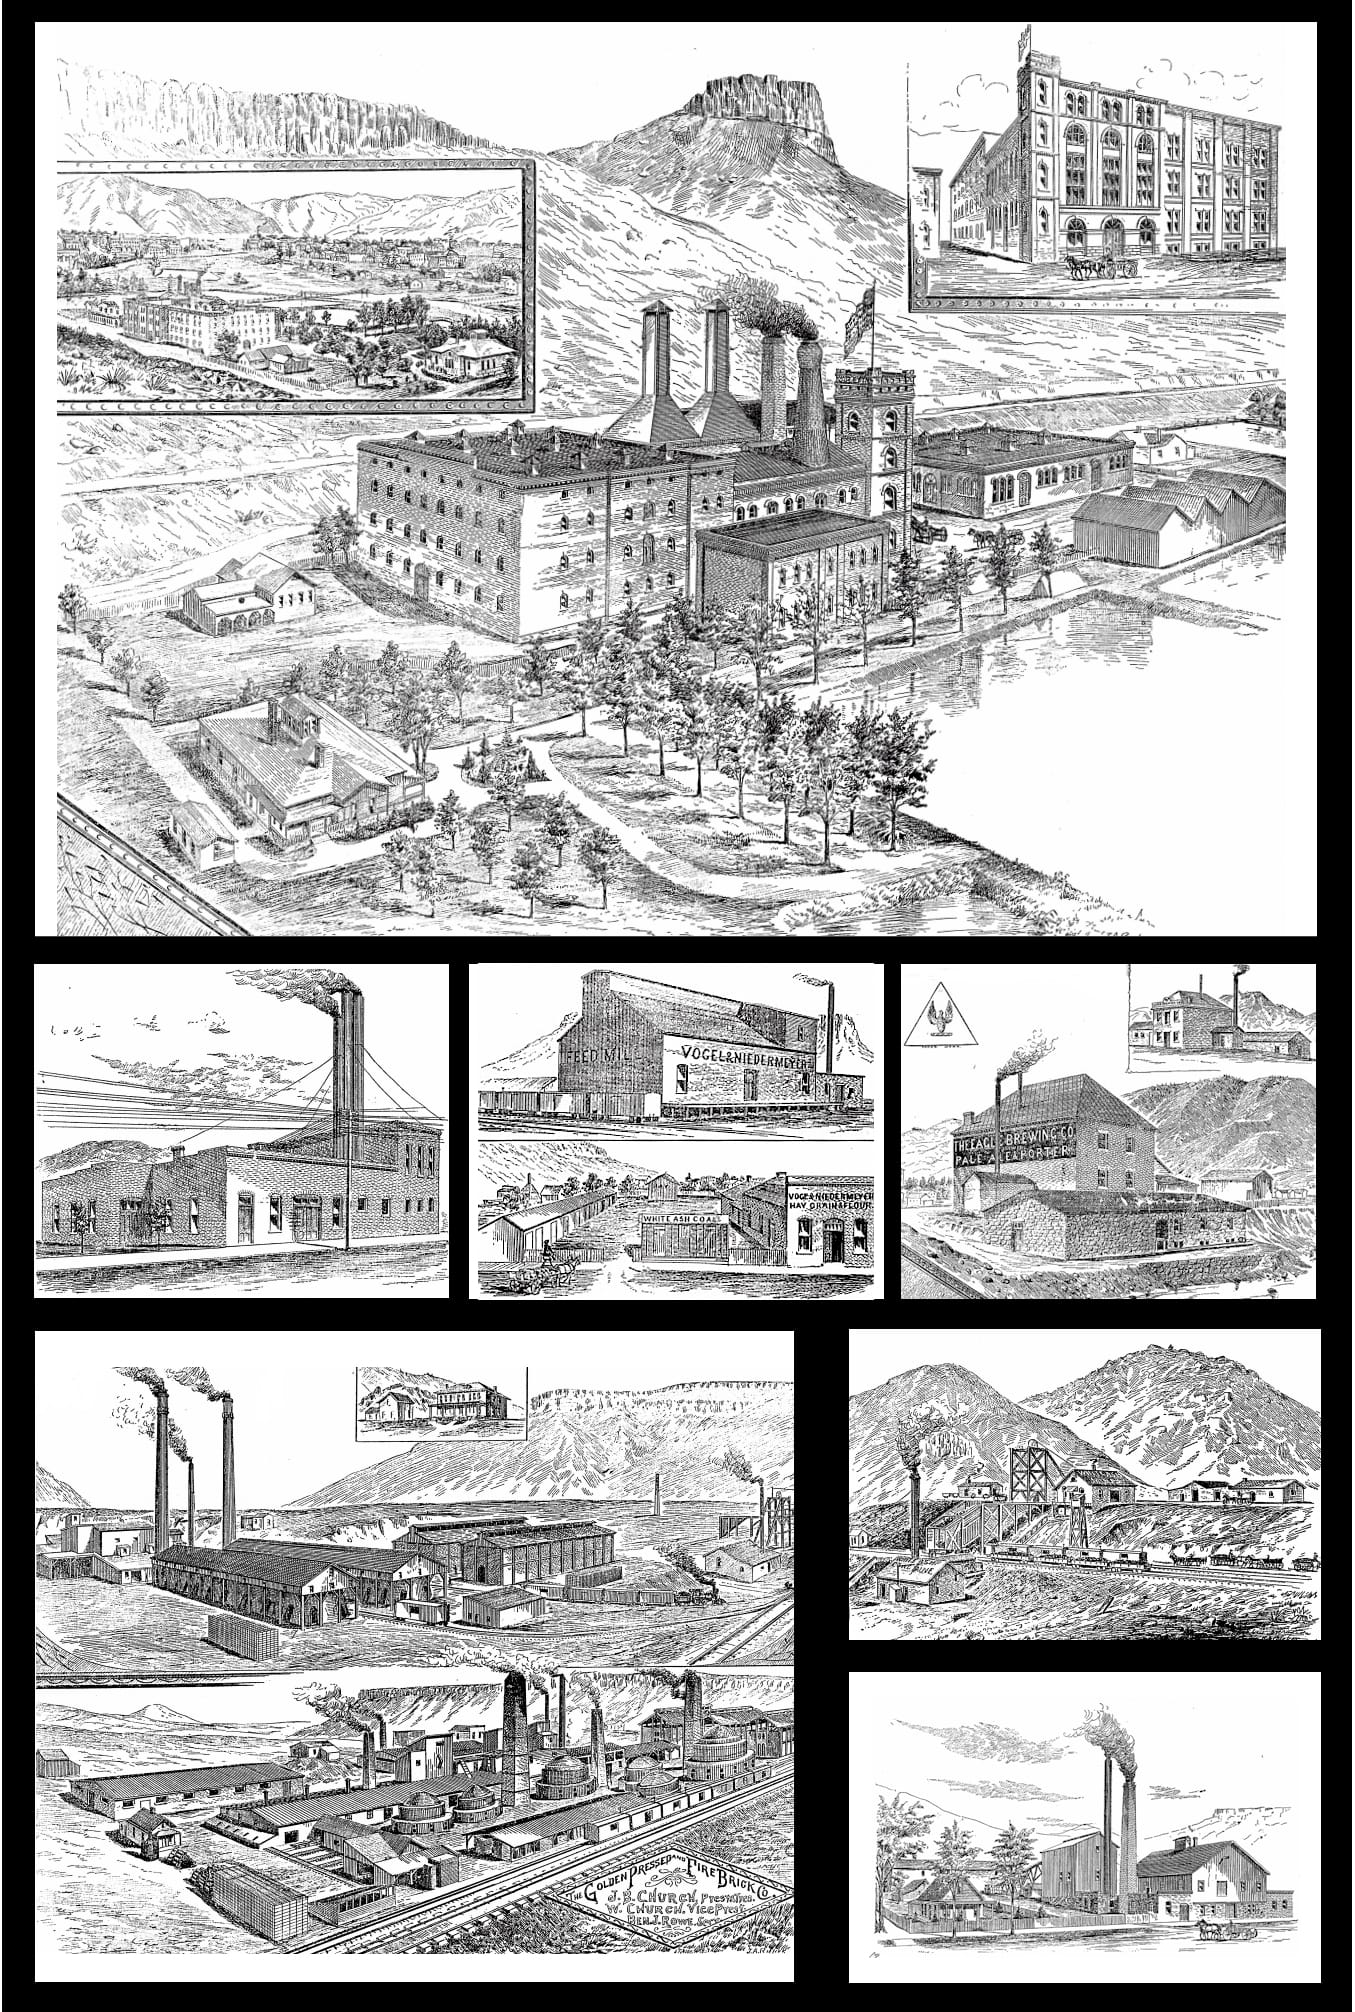 drawings of Coors, the illuminating company, Vogel feed mill, Eagle Brewing, White Ash coal, and the brickworks